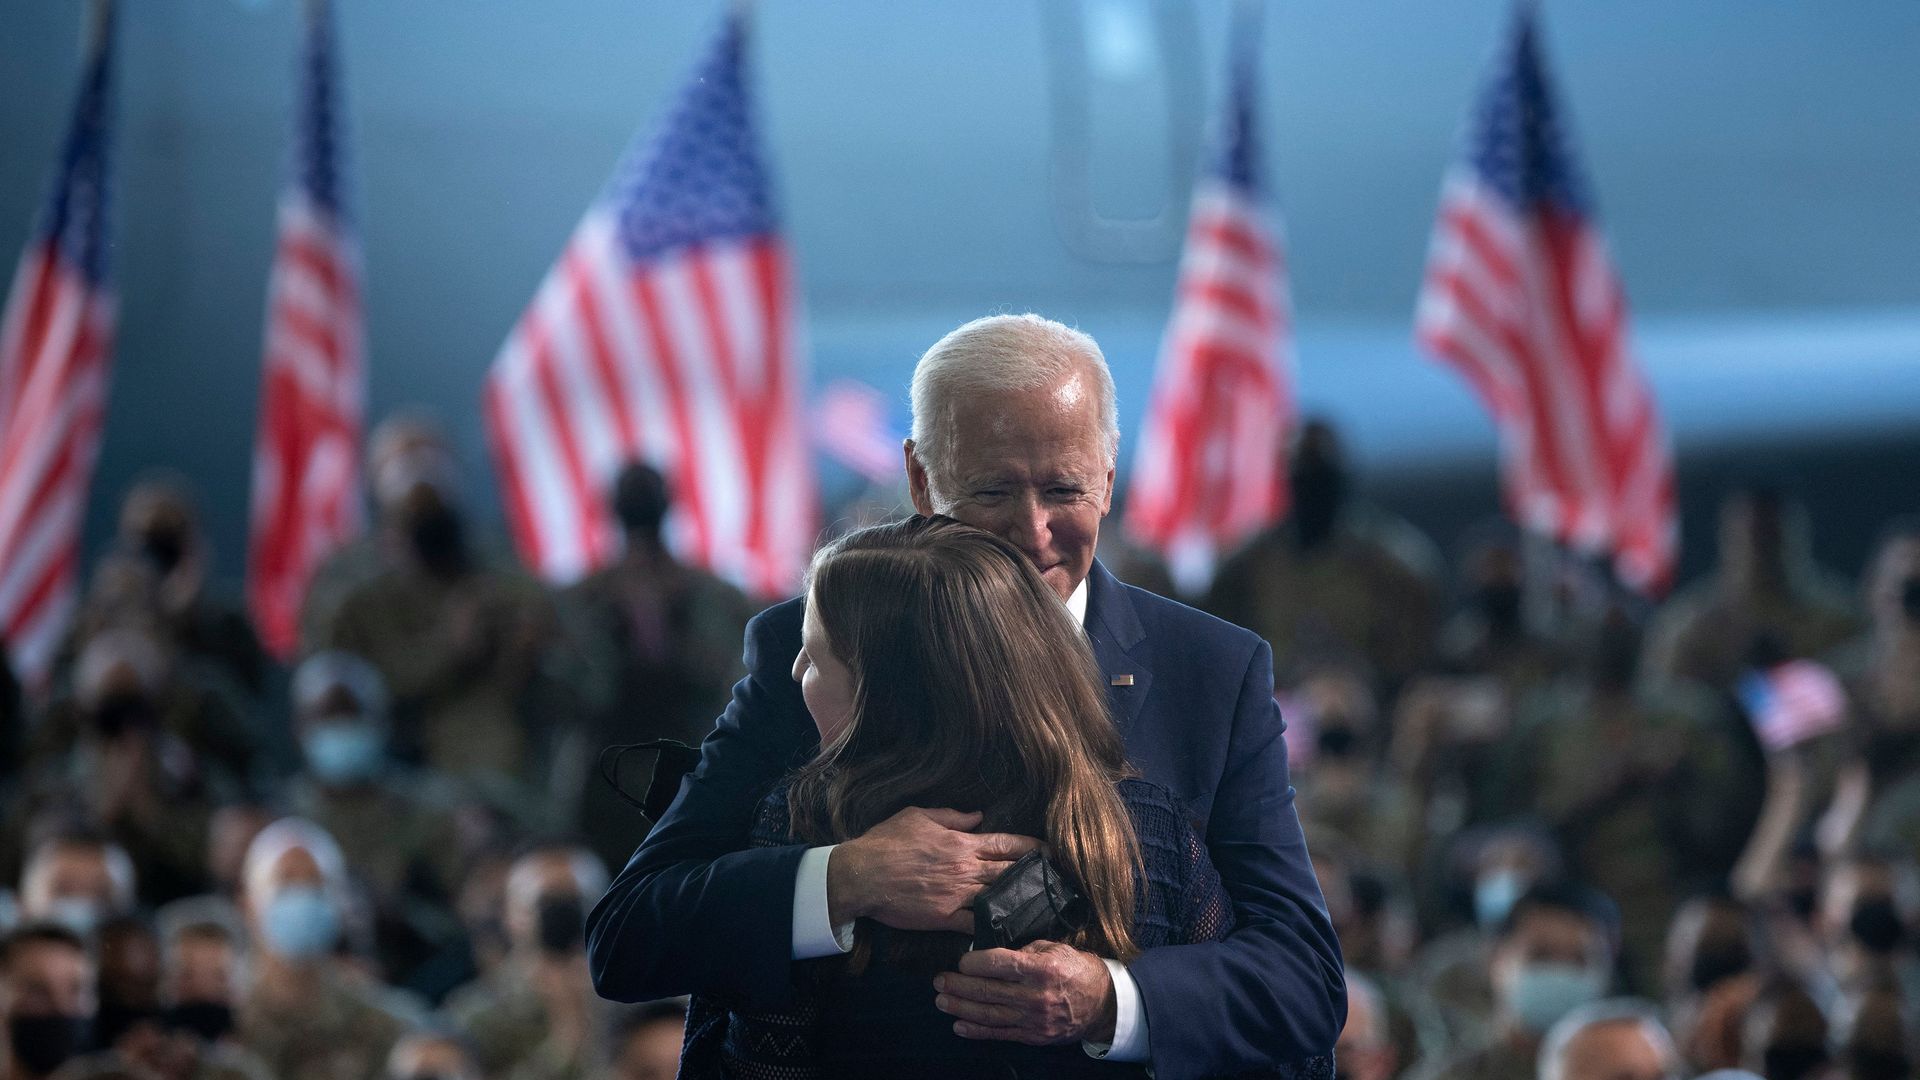 President Biden is seen embracing the 14-year-old who introduced him before he addressed U.S. troops in the U.K.